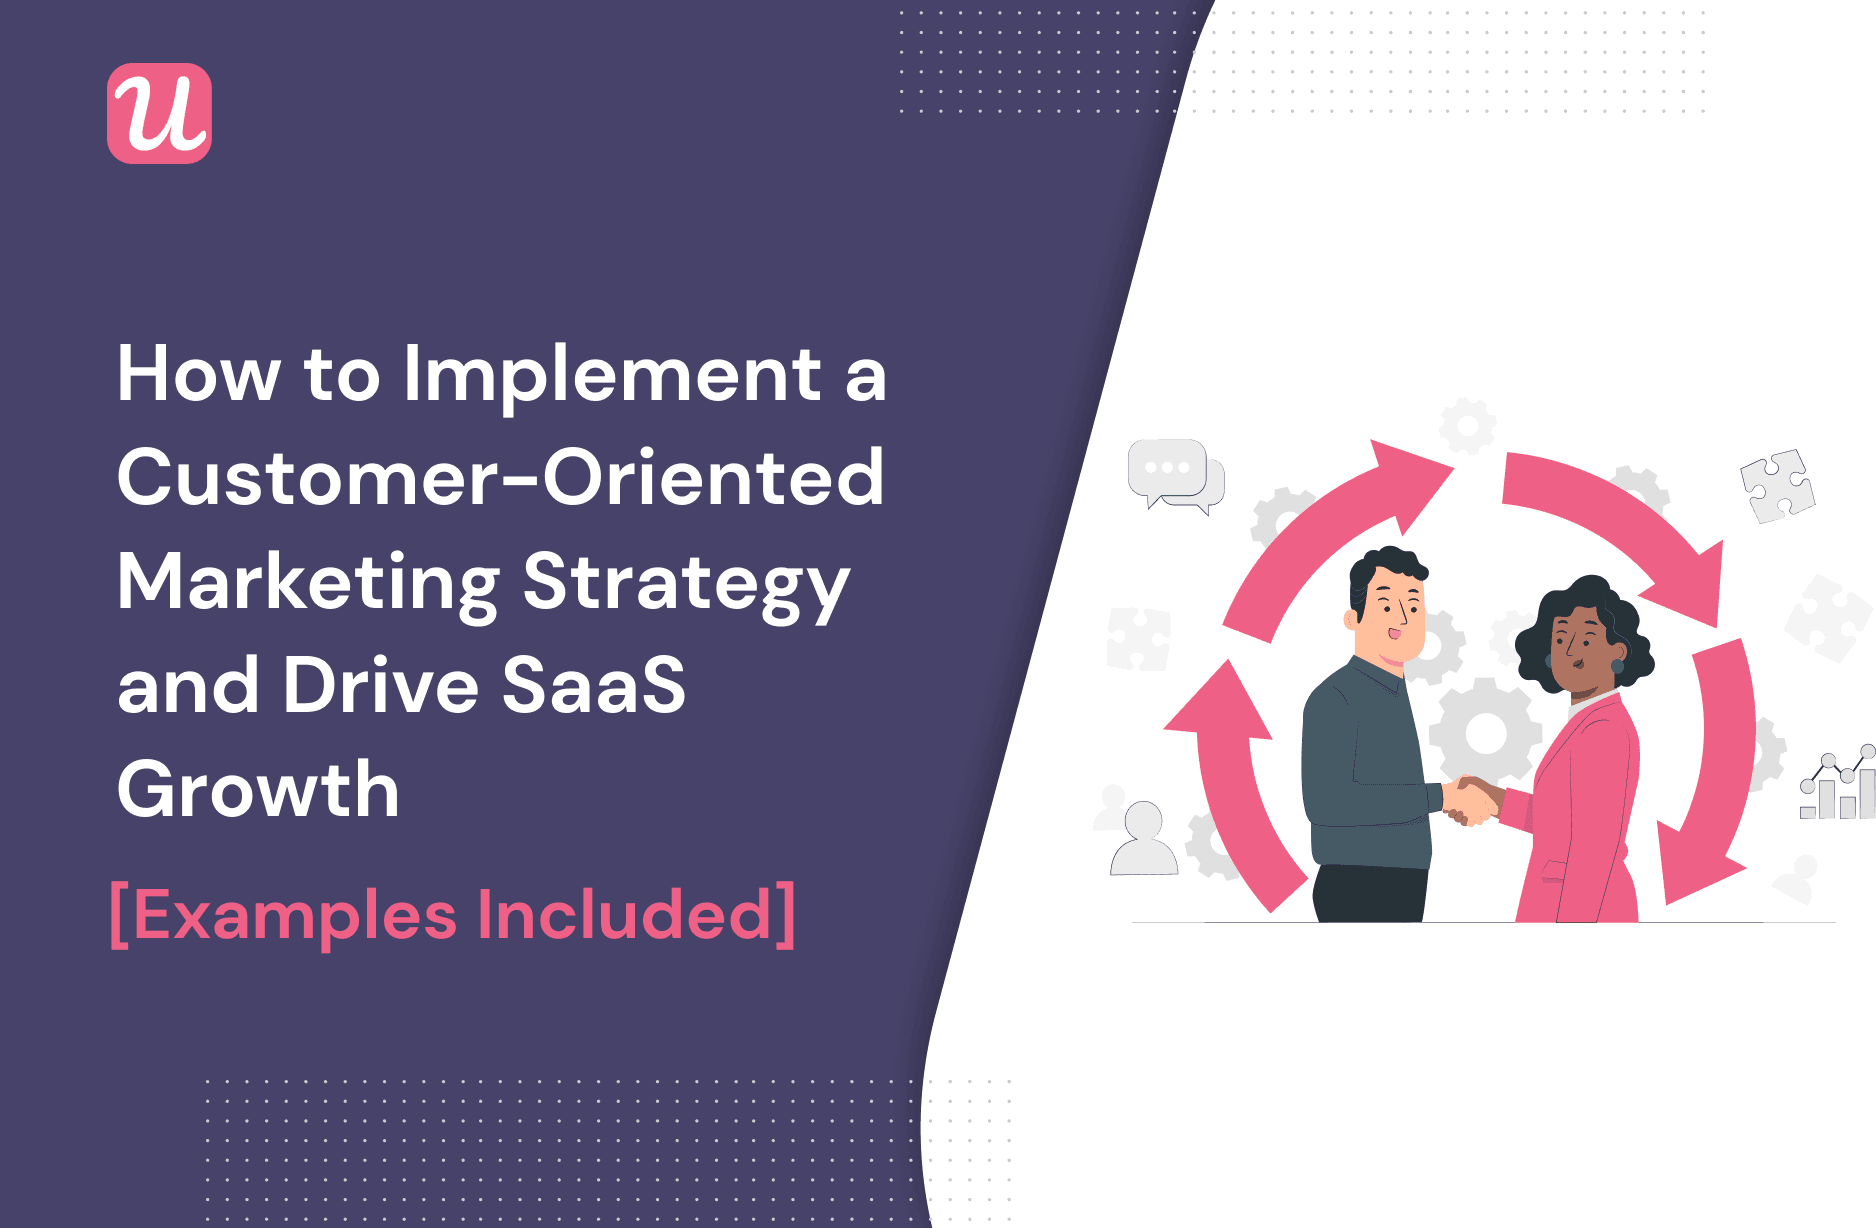 How to Implement a Customer-Oriented Marketing Strategy and Drive SaaS Growth [Examples Included]